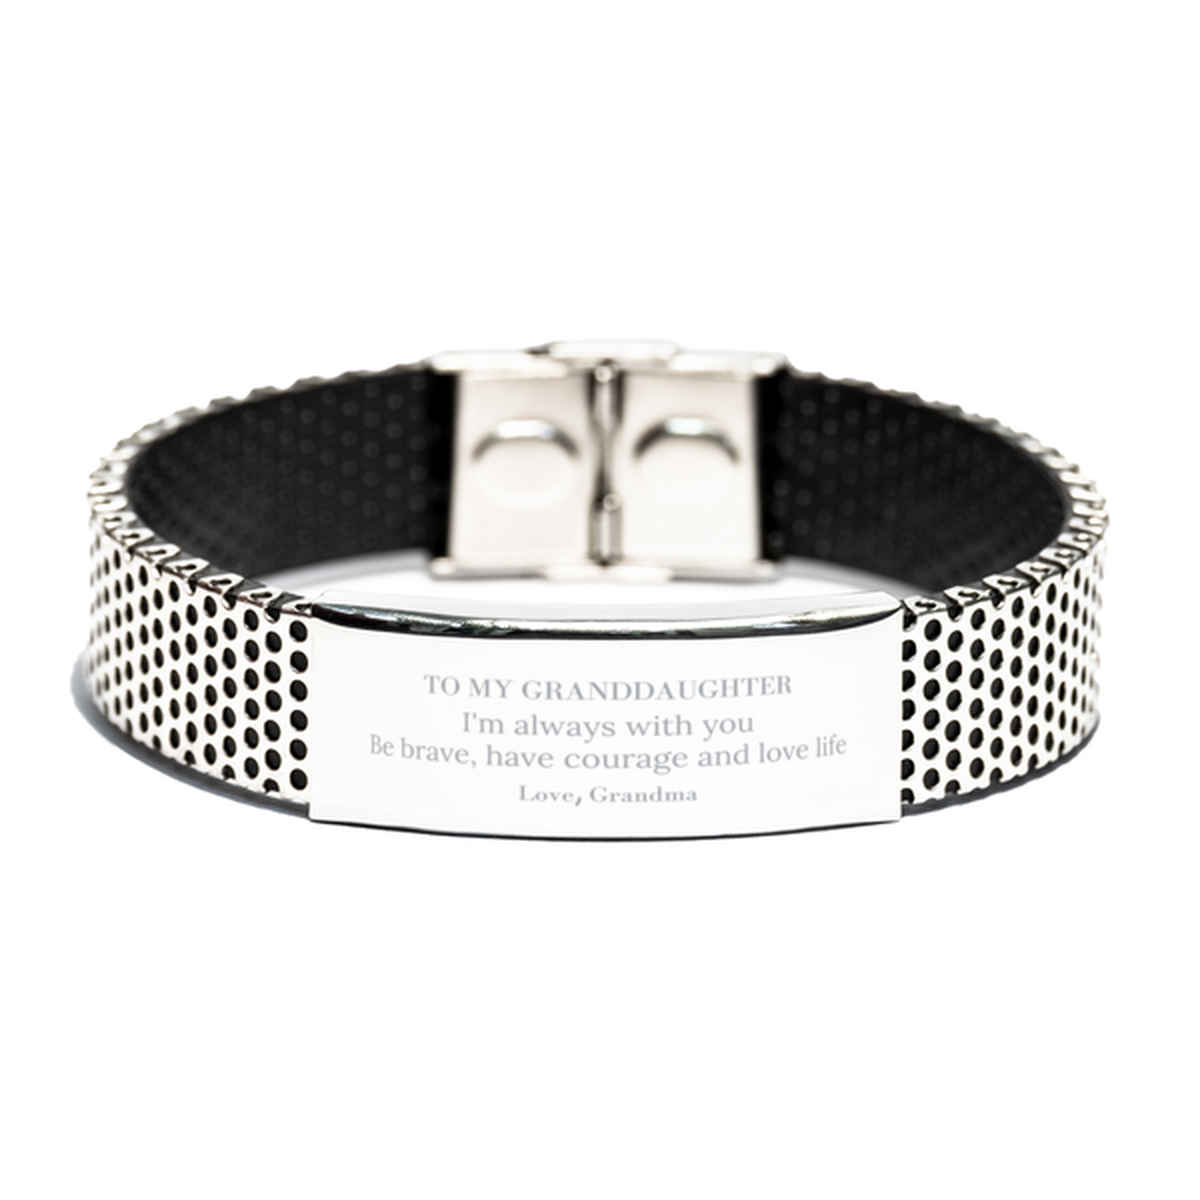 To My Granddaughter Gifts from Grandma, Unique Stainless Steel Bracelet Inspirational Christmas Birthday Graduation Gifts for Granddaughter I'm always with you. Be brave, have courage and love life. Love, Grandma